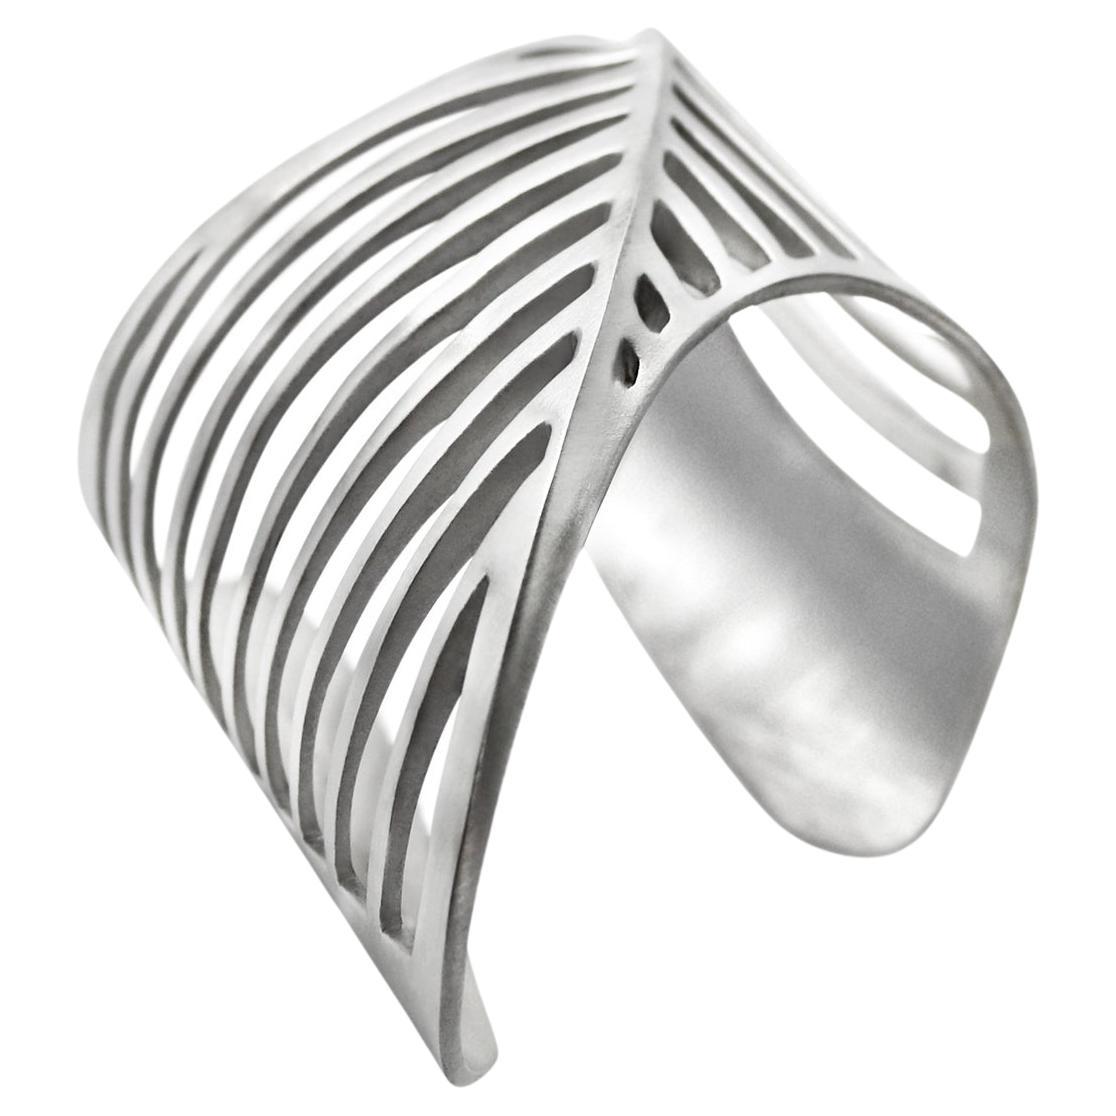 Sharch Cut Out Cuff Bracelet Silver Satin For Sale